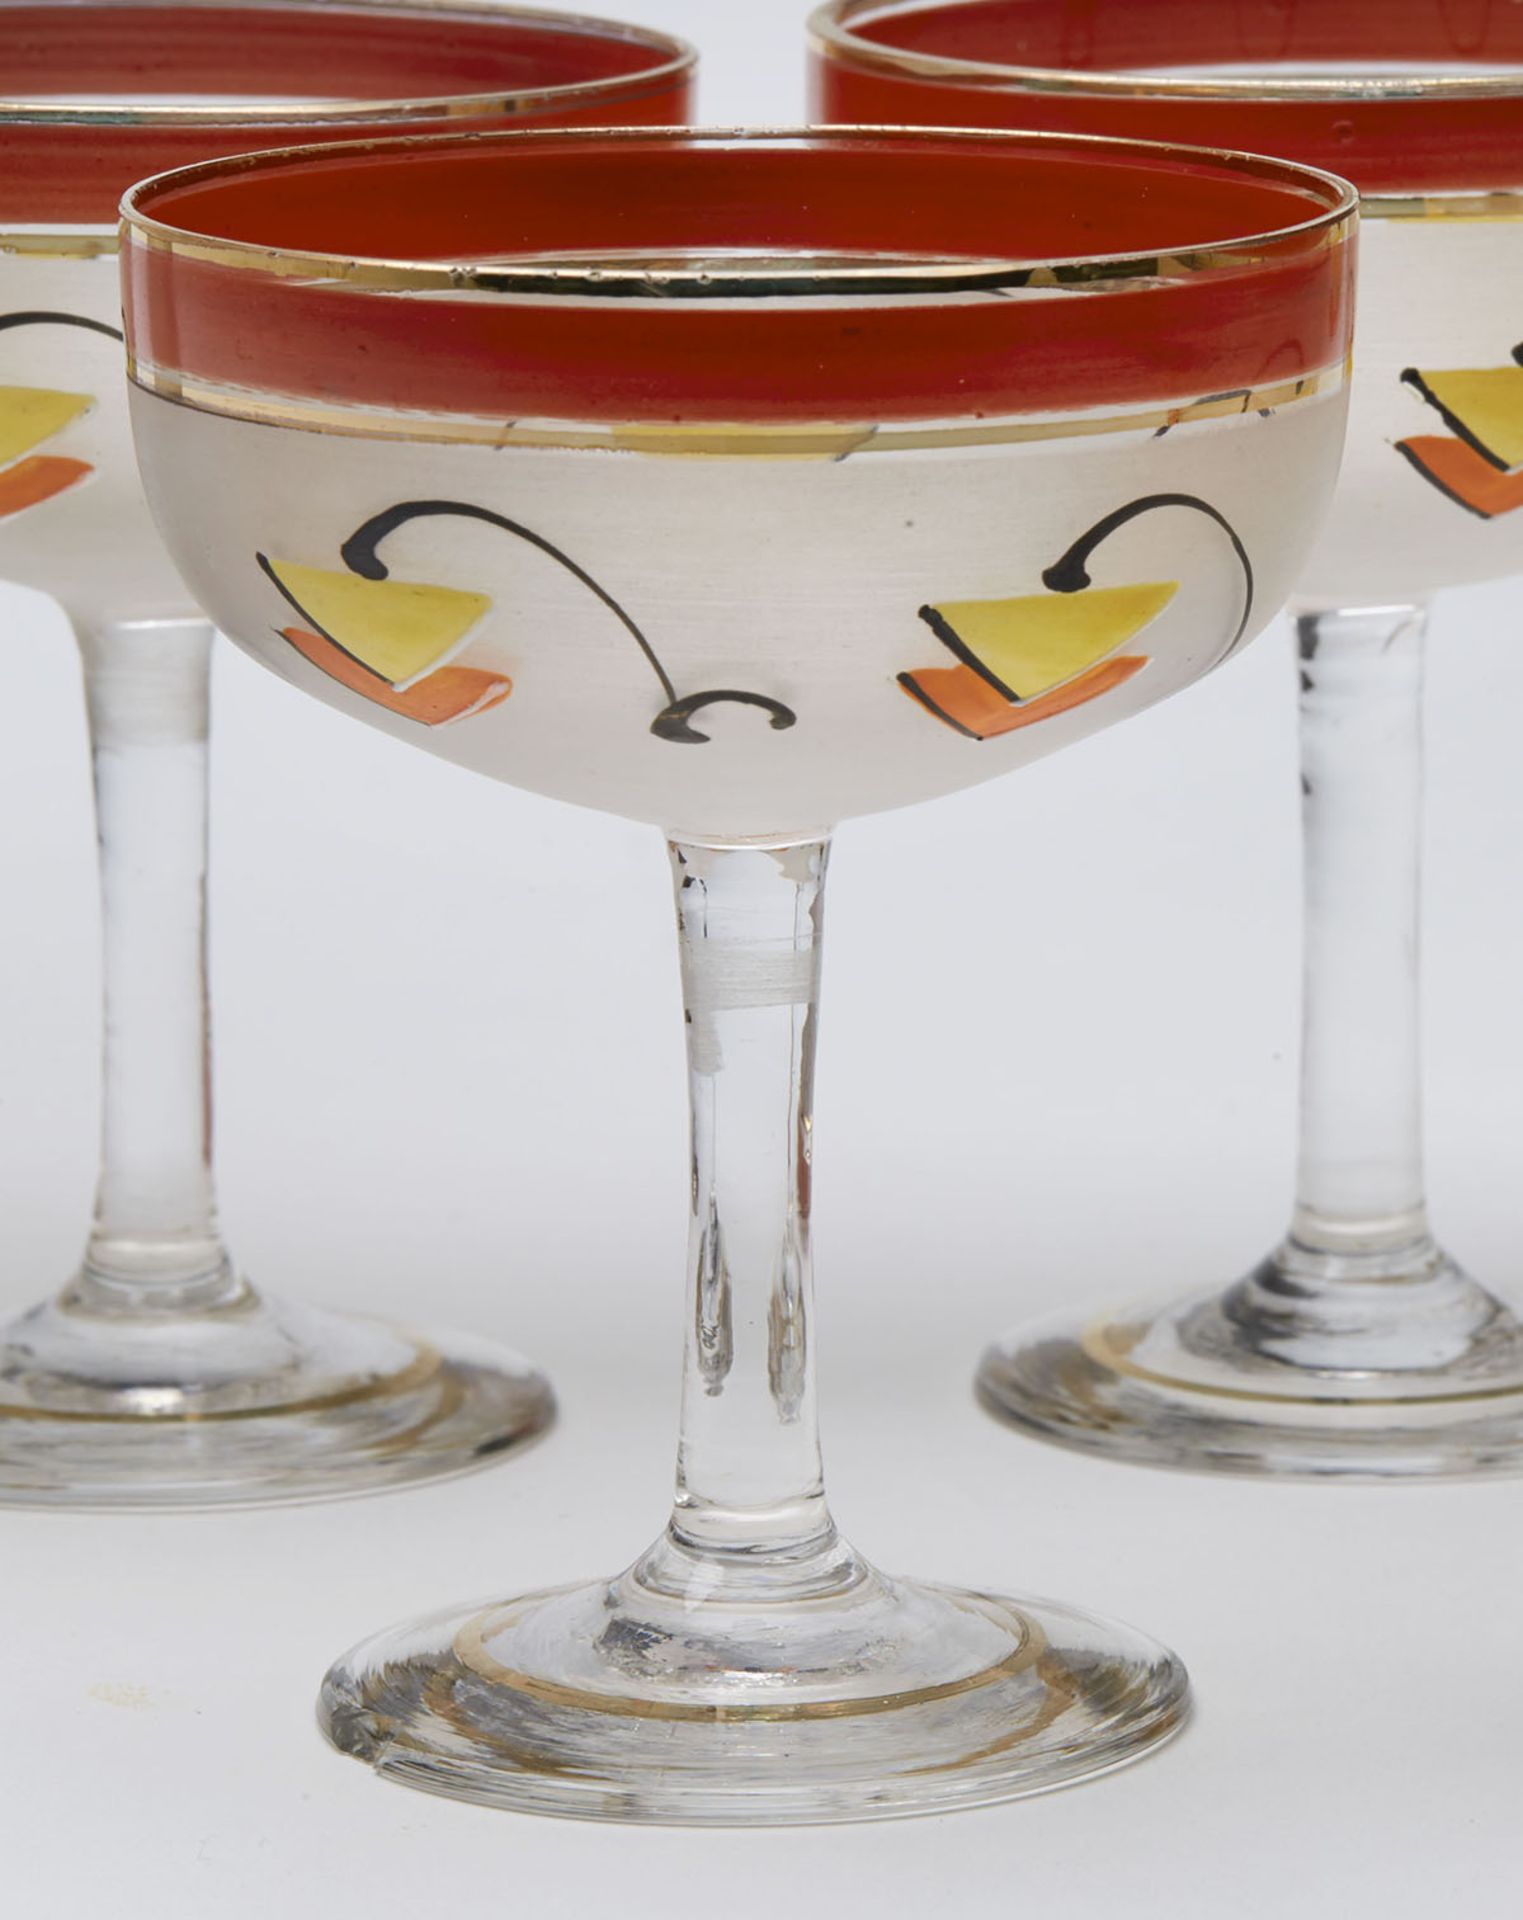 Art Deco Continental Handpainted Glass Cocktail Set C.1930 - Image 6 of 8